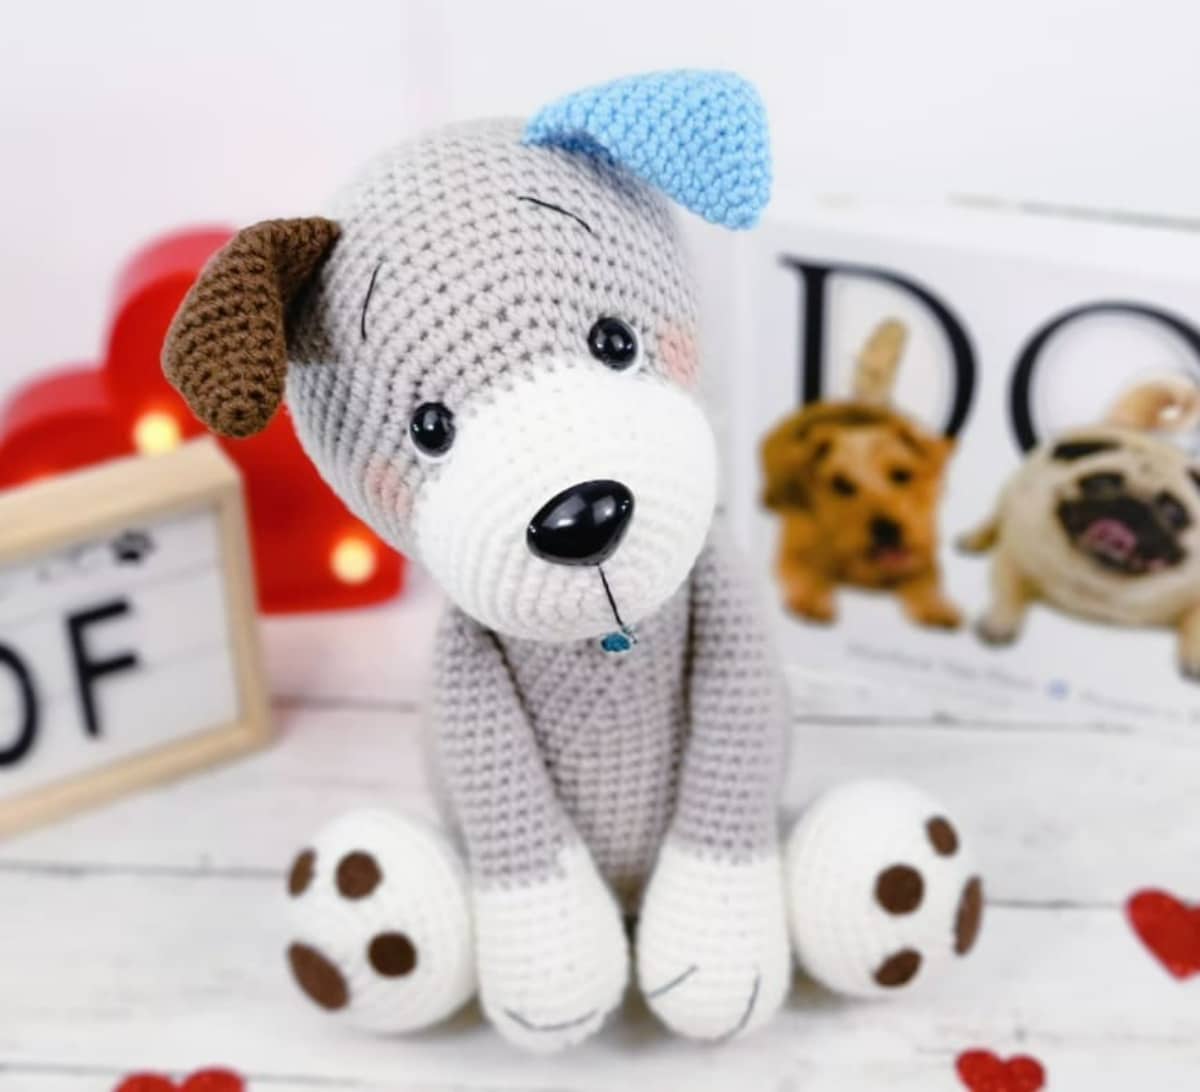 Light gray stuffed crochet dog with one brown ear and one blue ear sitting on a light wooden floor.